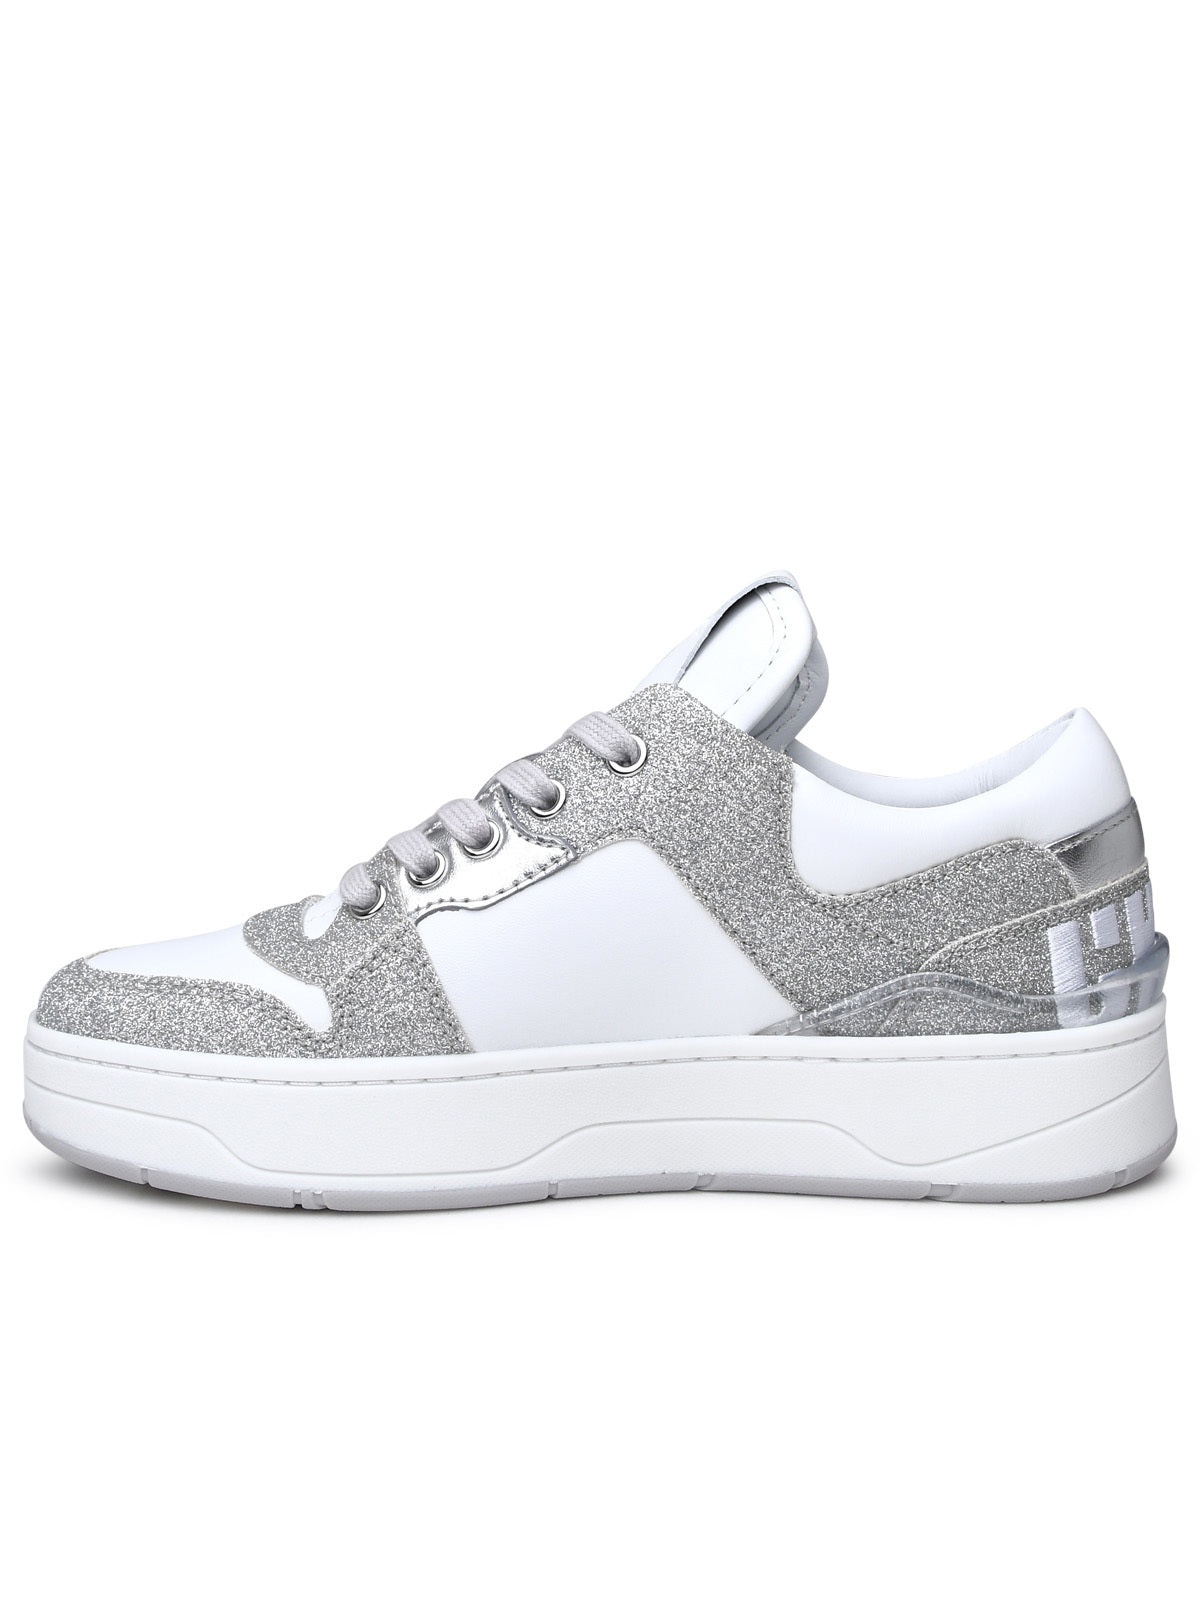 Jimmy Choo Woman Cashmere White Leather Sneakers - 3